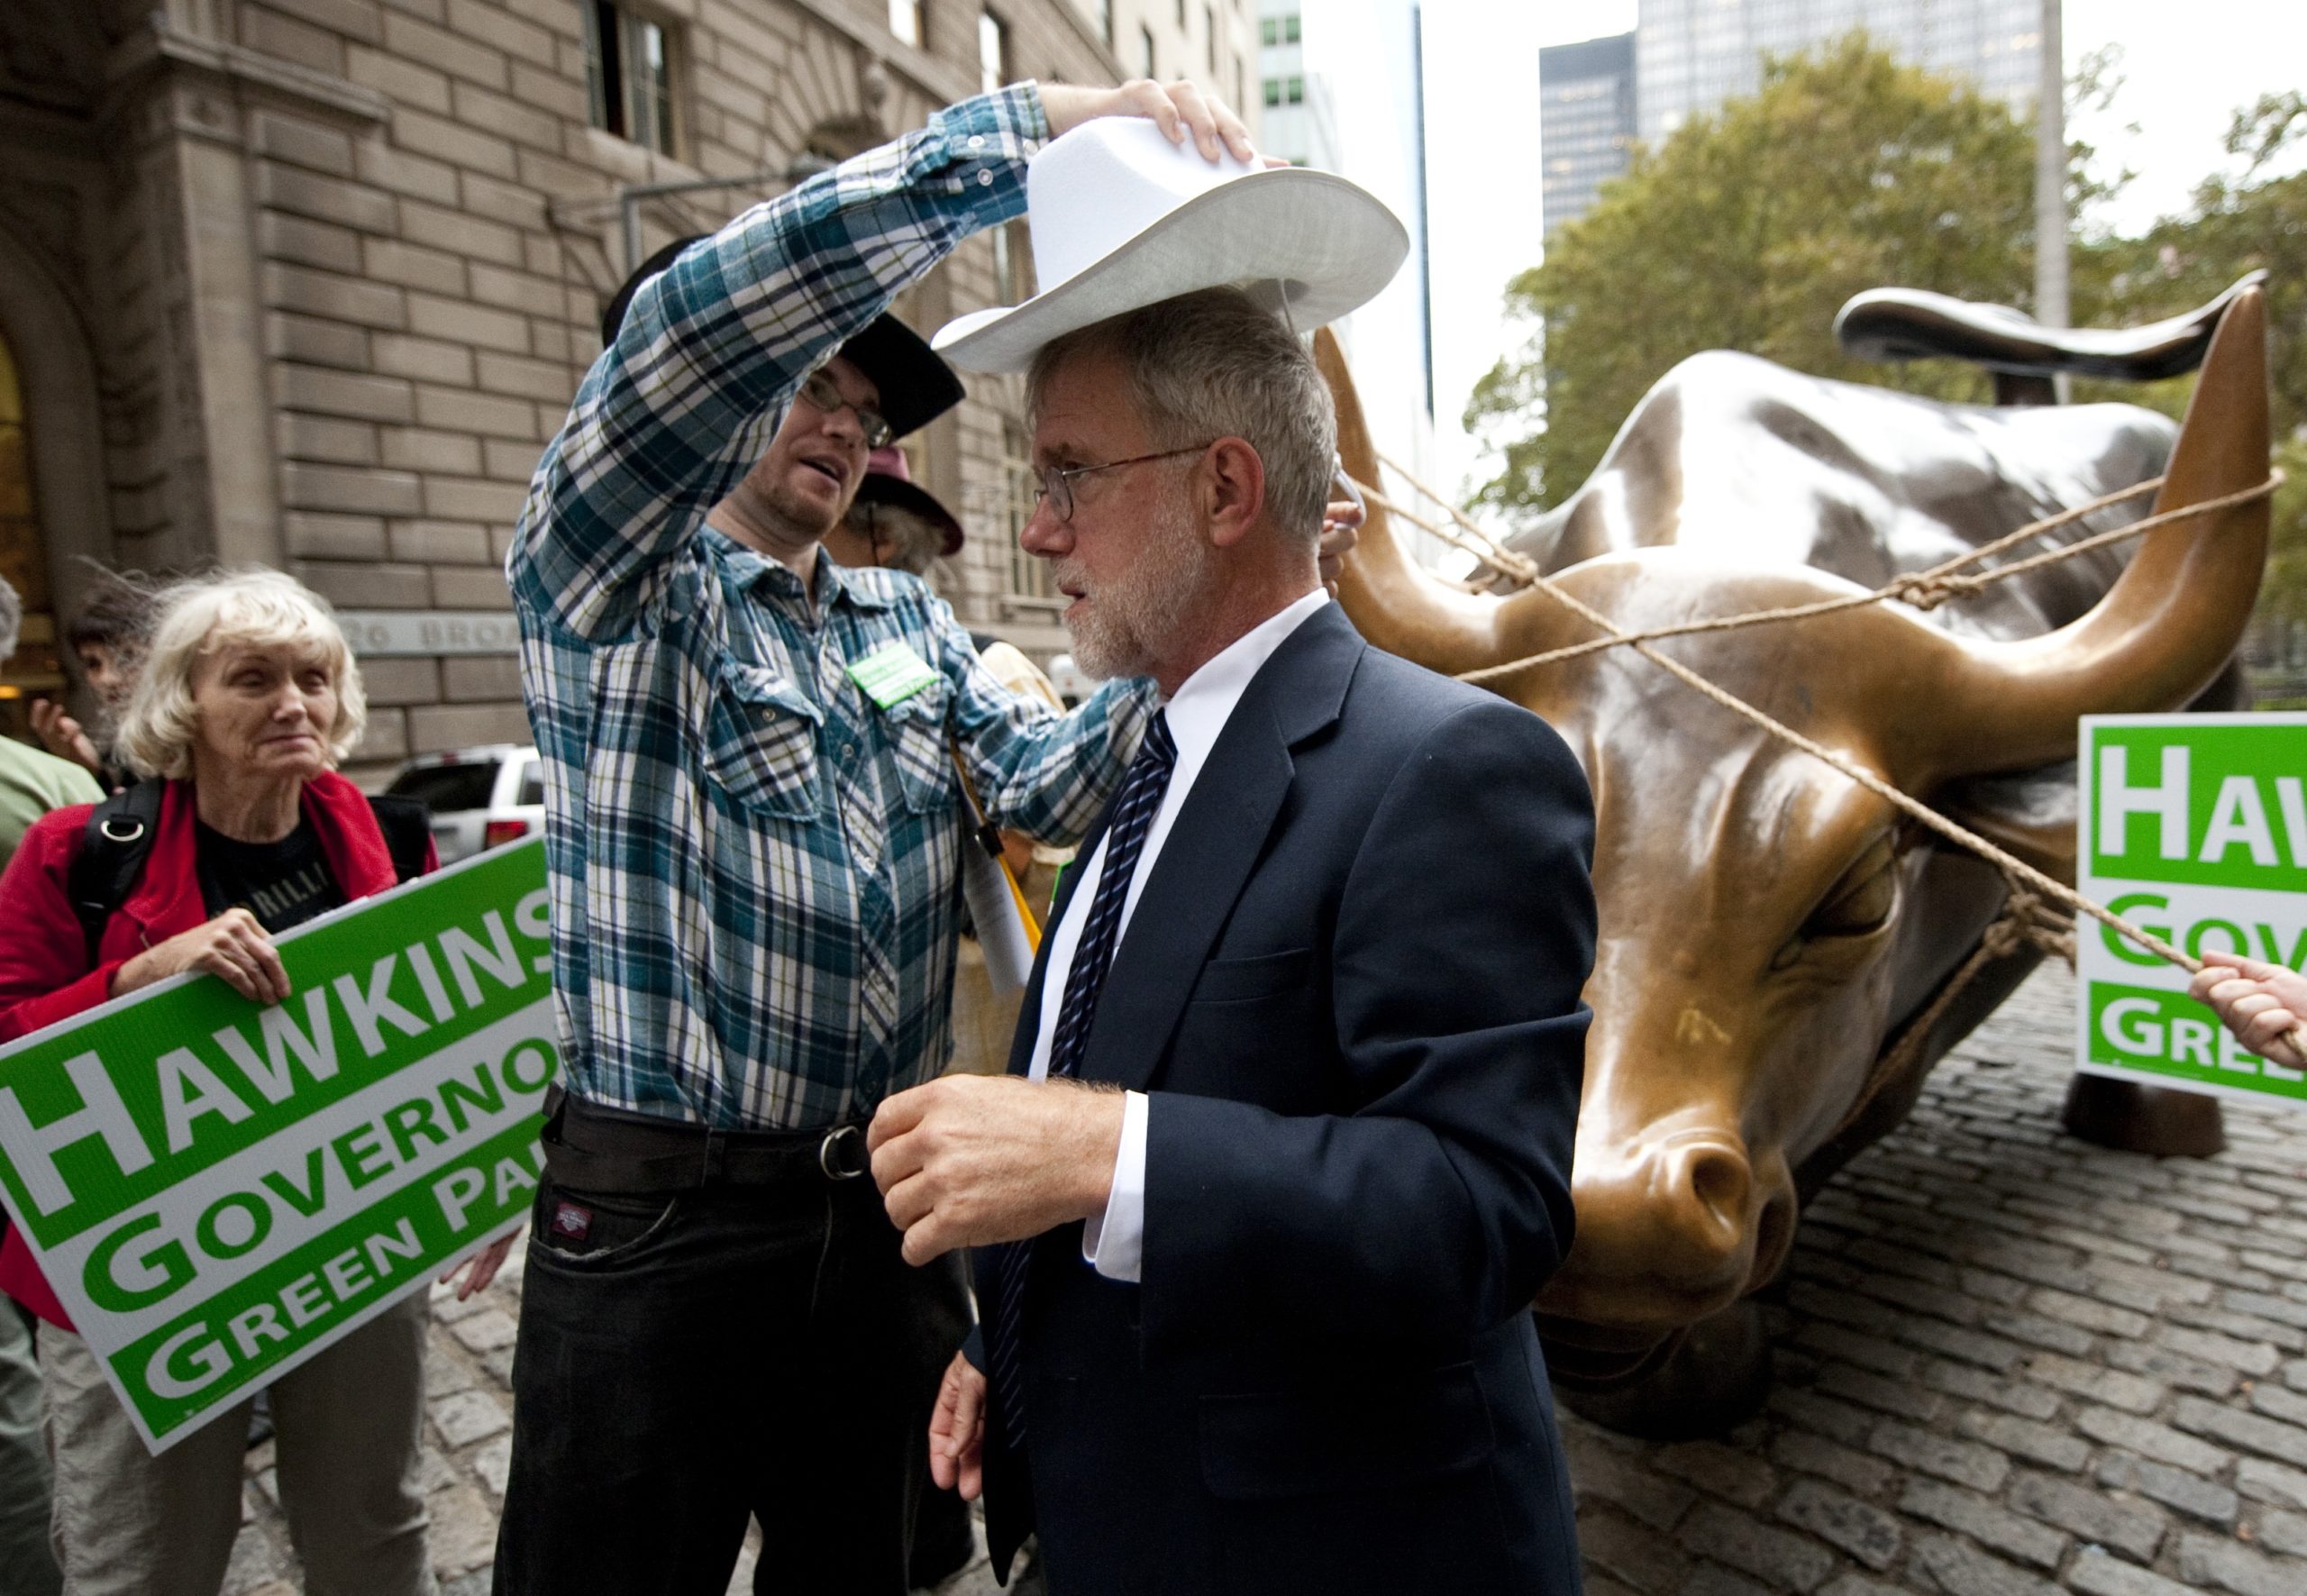 Green Party candidate for NY Governor, Howie Hawkins, has a hat placed on his head by a campaign worker October 27, 2010 at the Bowling Green Bull in New York. At his "Wall Street Rodeo" Hawkins said that stock transfer tax money should be going into jobs not back into Wall Street coffers. AFP PHOTO/DON EMMERT (Photo credit should read DON EMMERT/AFP via Getty Images)